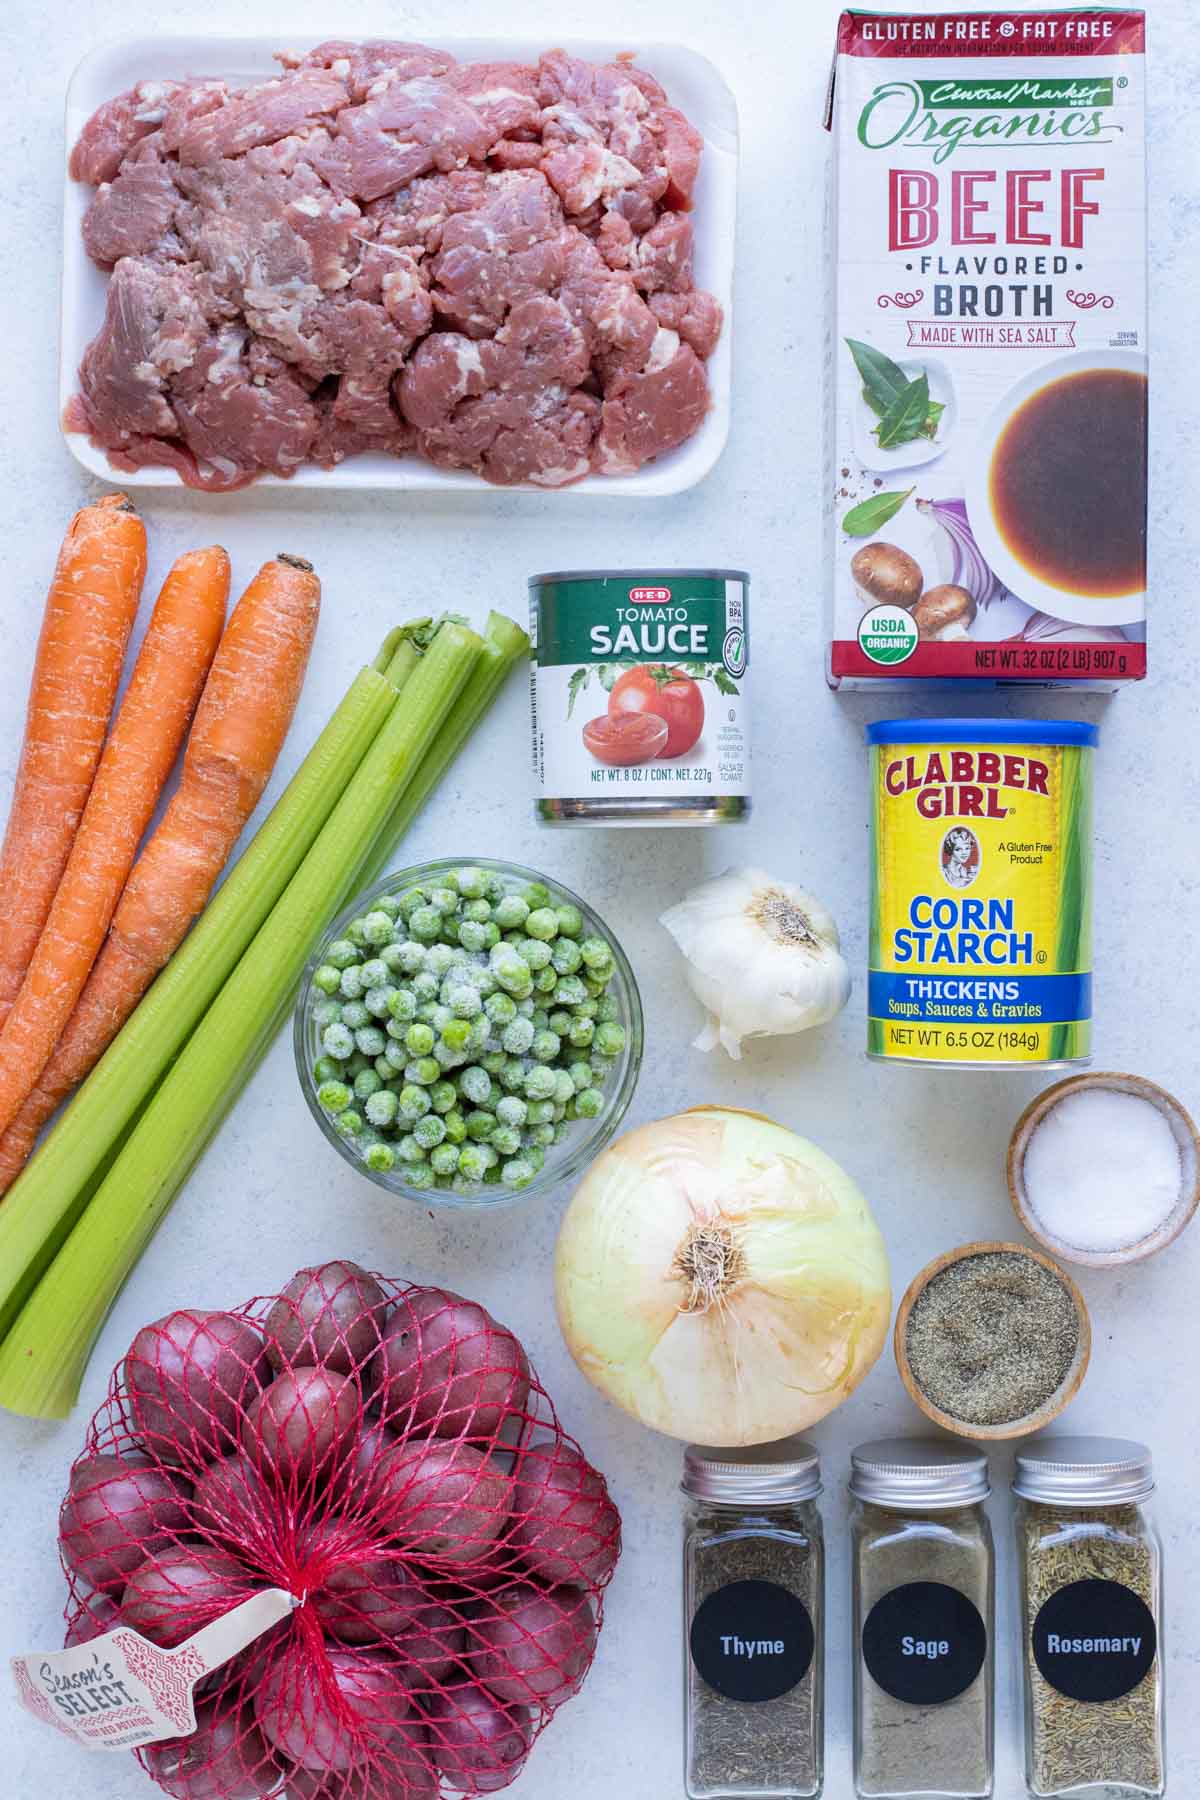 Carrots, celery, potatoes, onion, peas, beef, cornstarch, beef broth, and canned tomatoes are the ingredients for this recipe.